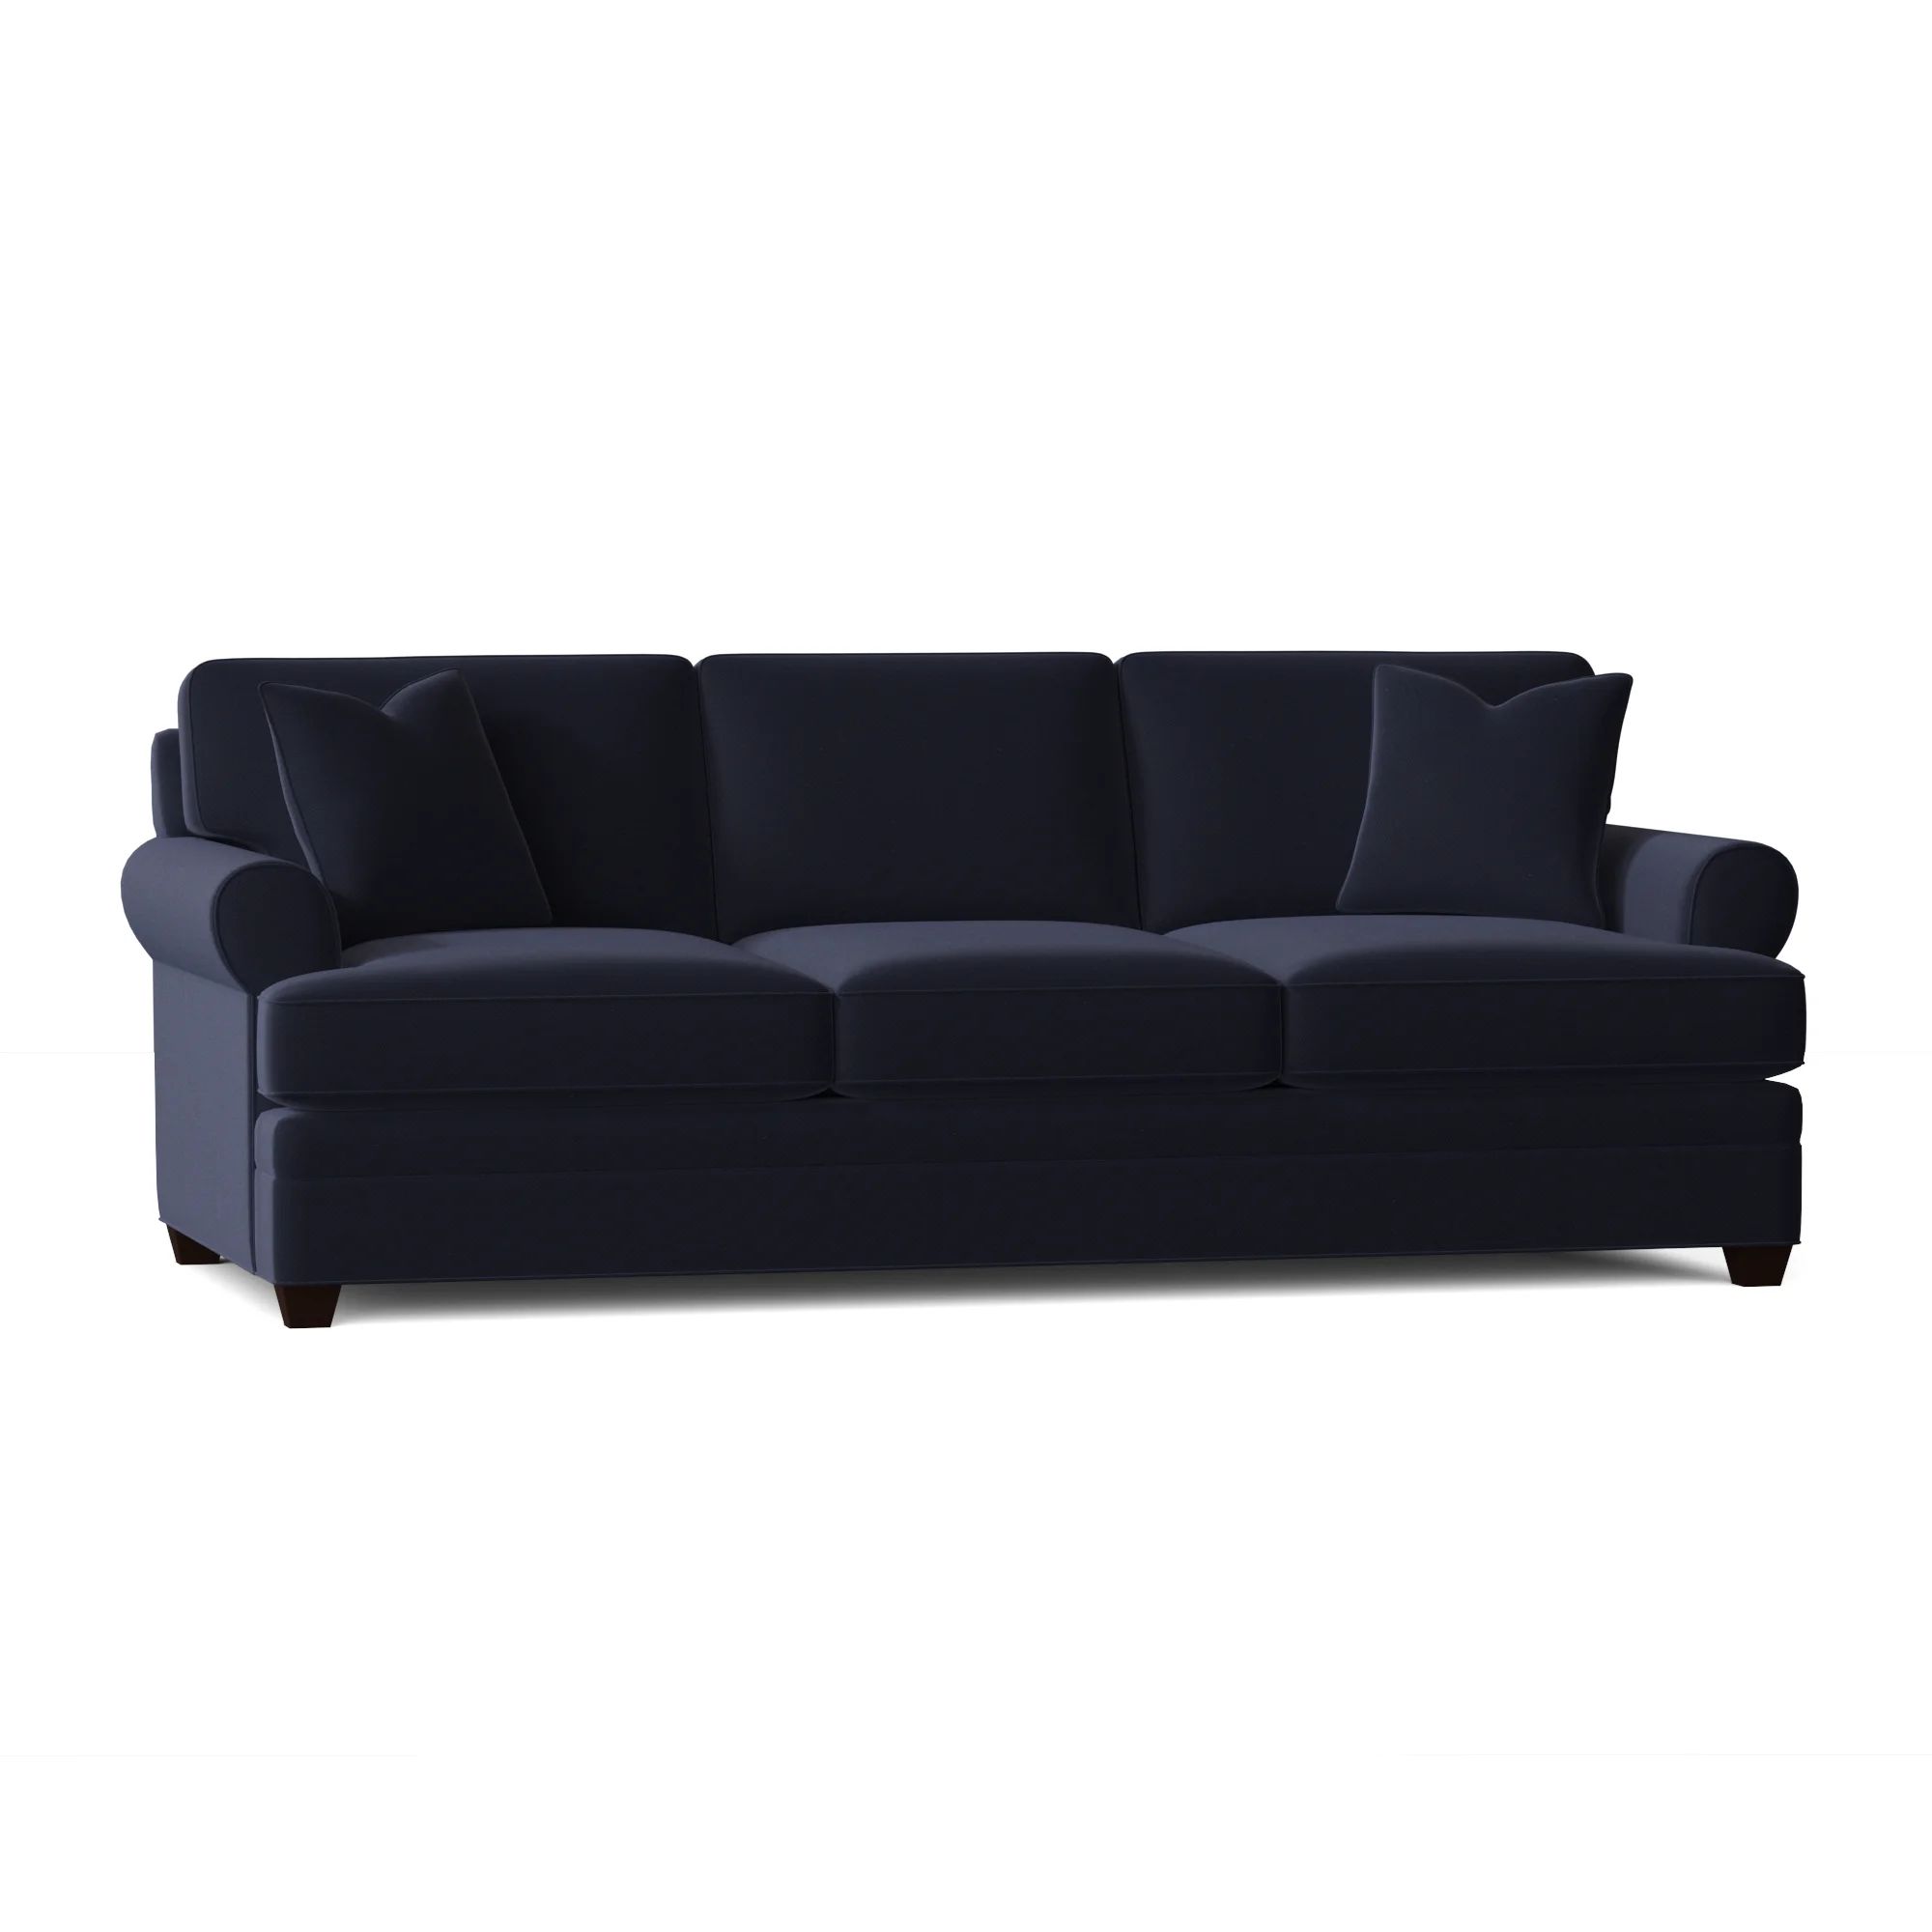 91" Rolled Arm Sofa with Reversible Cushions | Wayfair Professional